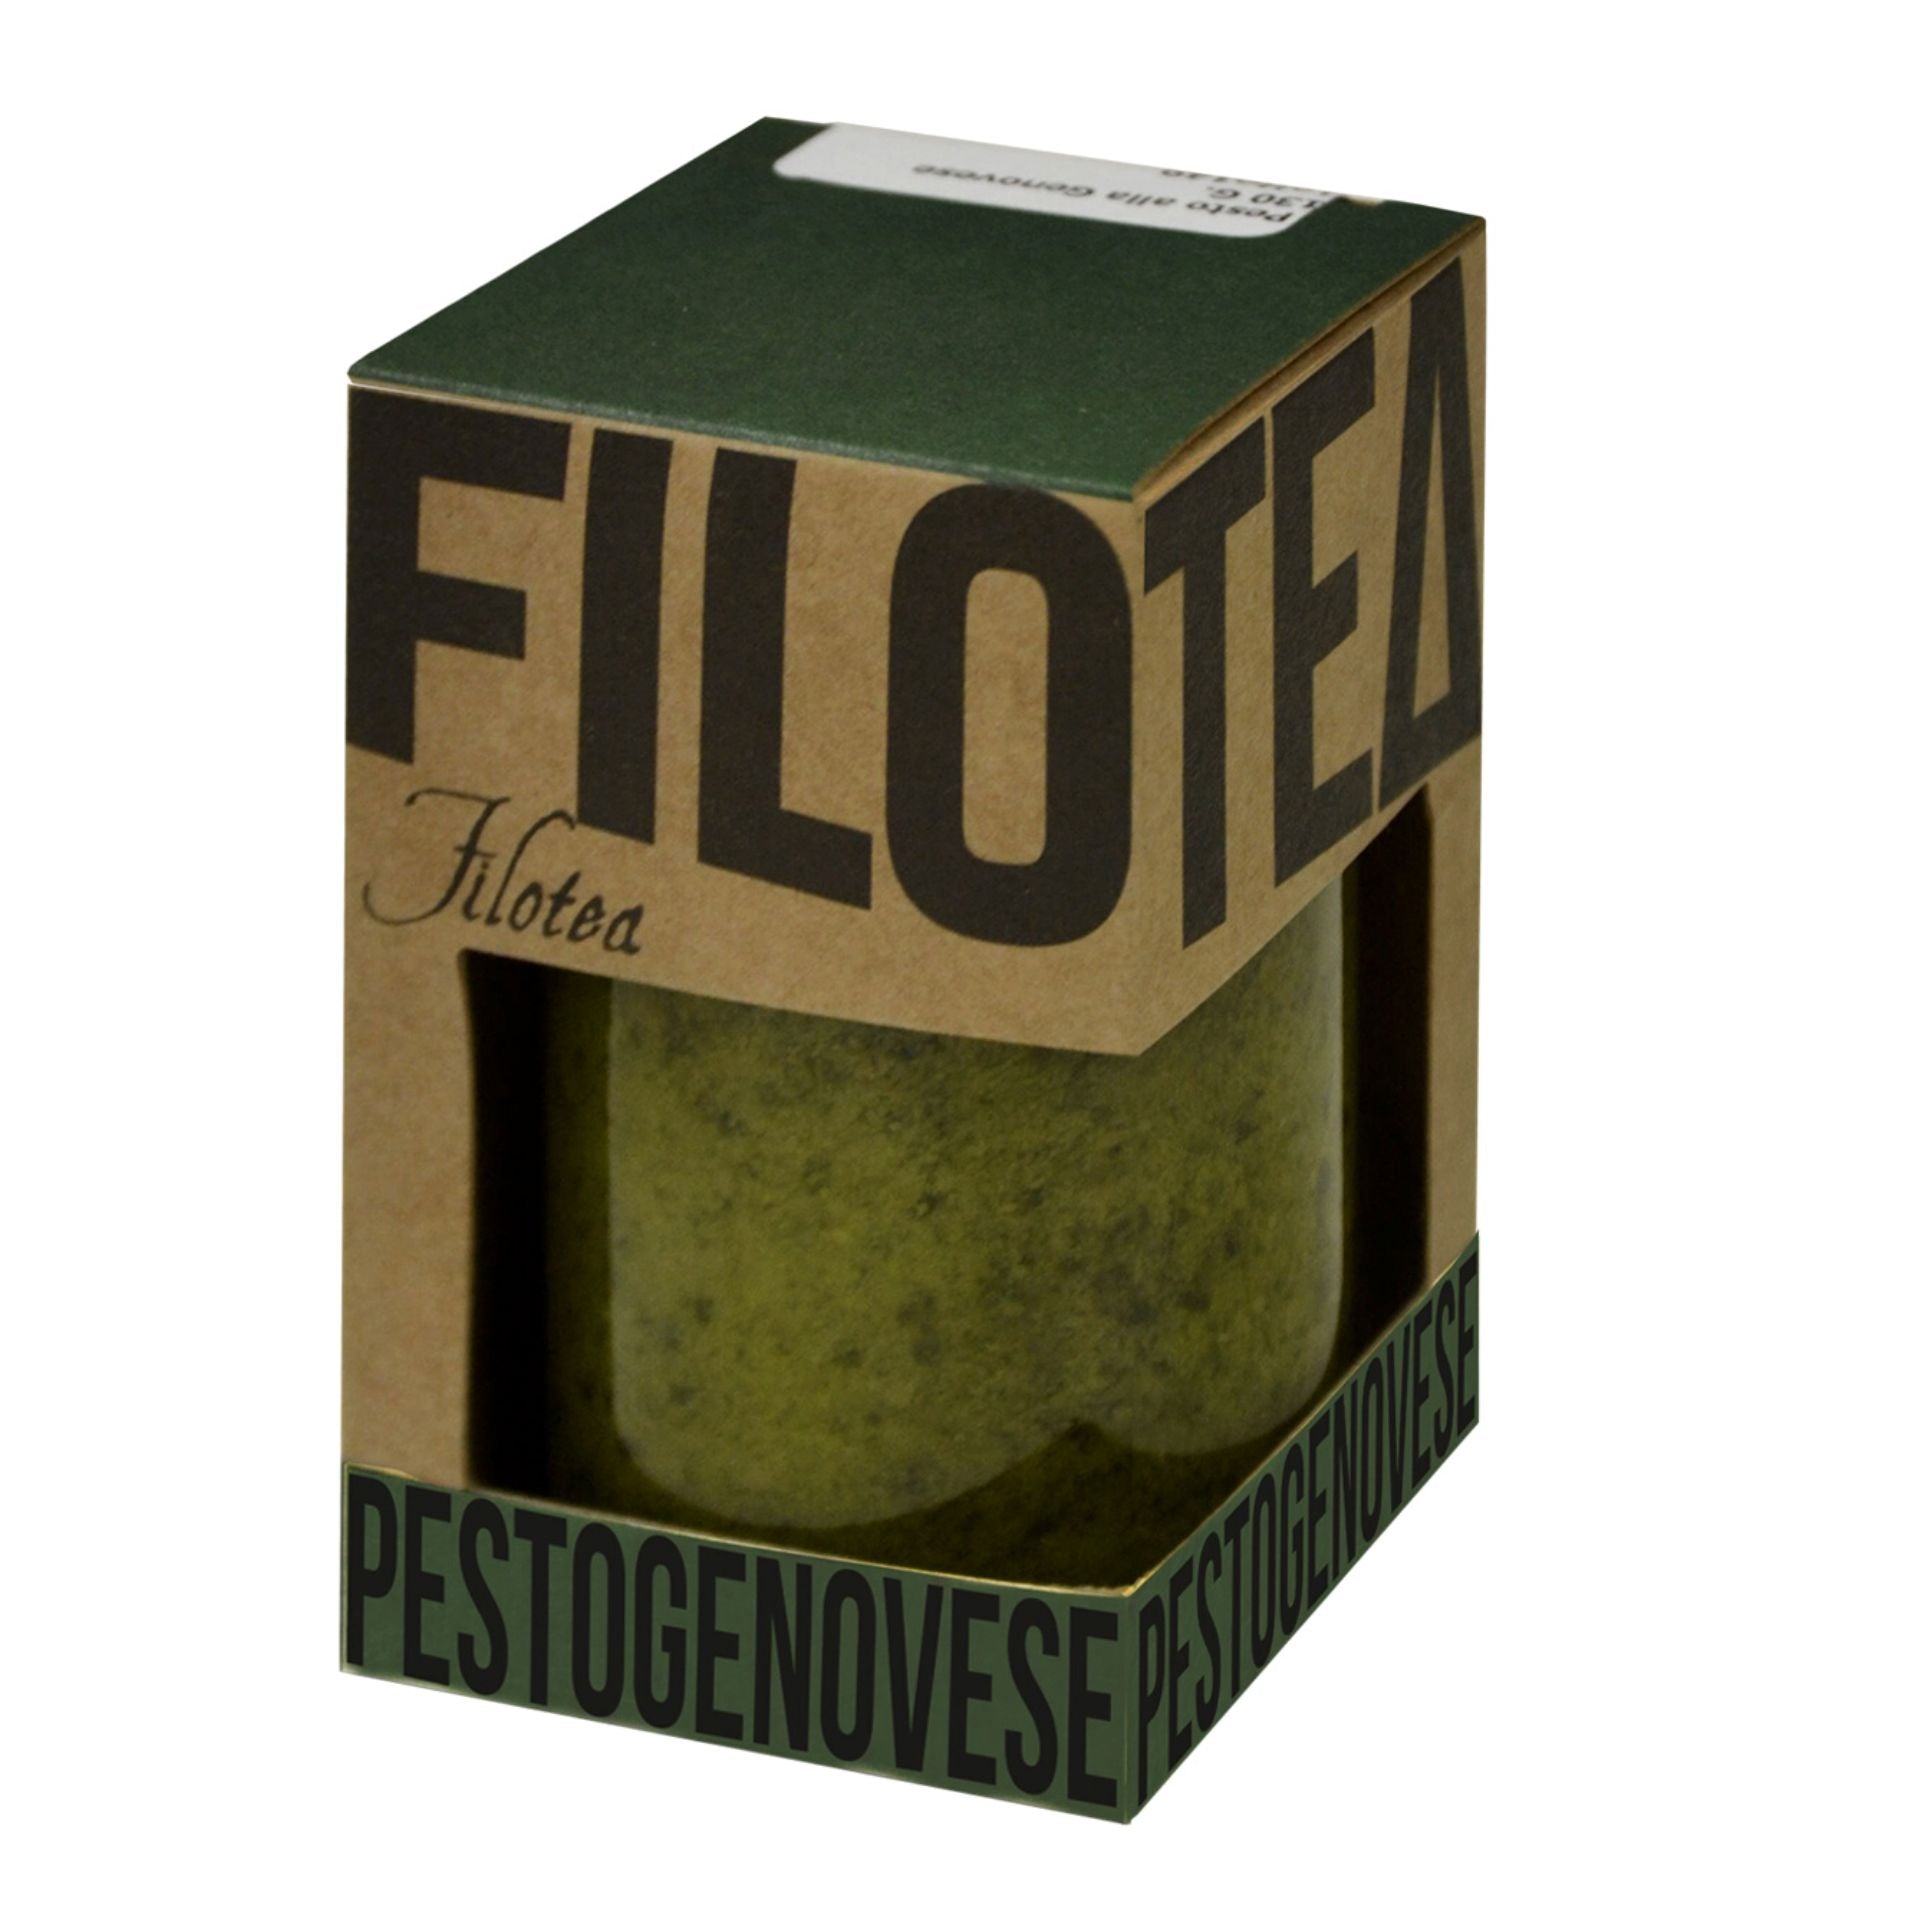 Filotea Genoese Basil Pesto 130g  | Imported and distributed in the UK by Just Gourmet Foods